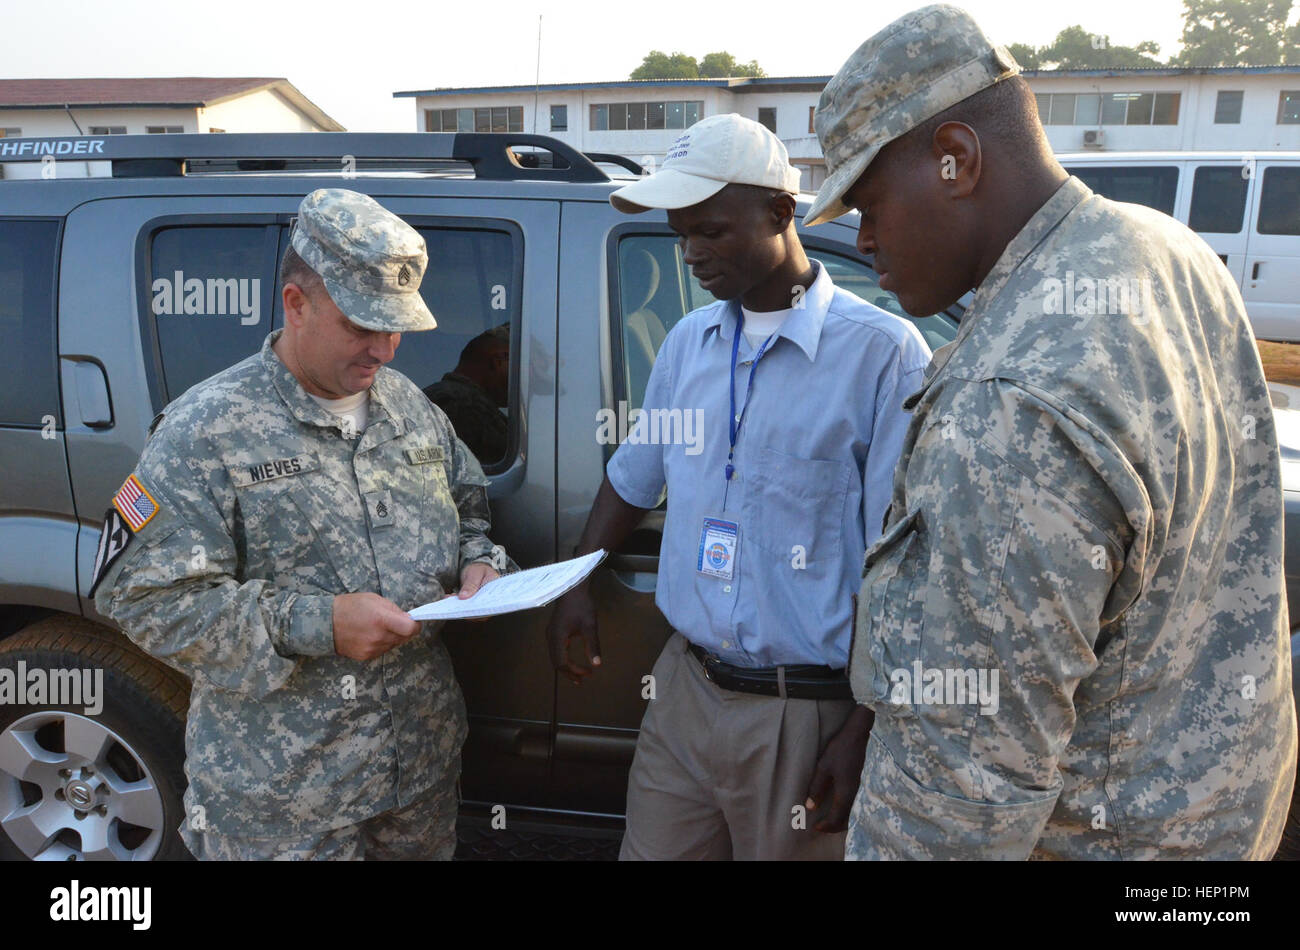 From left, Staff Sgt. Jose Nieves, a Bayamon, Puerto Rico, native and movement noncommissioned officer for Headquarters and Headquarters Company, 36th Engineer Brigade, talks to Haji A. Sheriff, a Liberia, Monrovia native and a driver, about his routes before he goes out on a mission to Buchanan, Liberia, Dec. 27, 2014, from the National Police Training Academy, Paynesville, Liberia, during Operation United Assistance. Spc. Joshua Owens, Chicago native and a movement specialist also with HHC, 36th Engineer Brigade, listens to the conversation. Operation United Assistance is a Department of Def Stock Photo